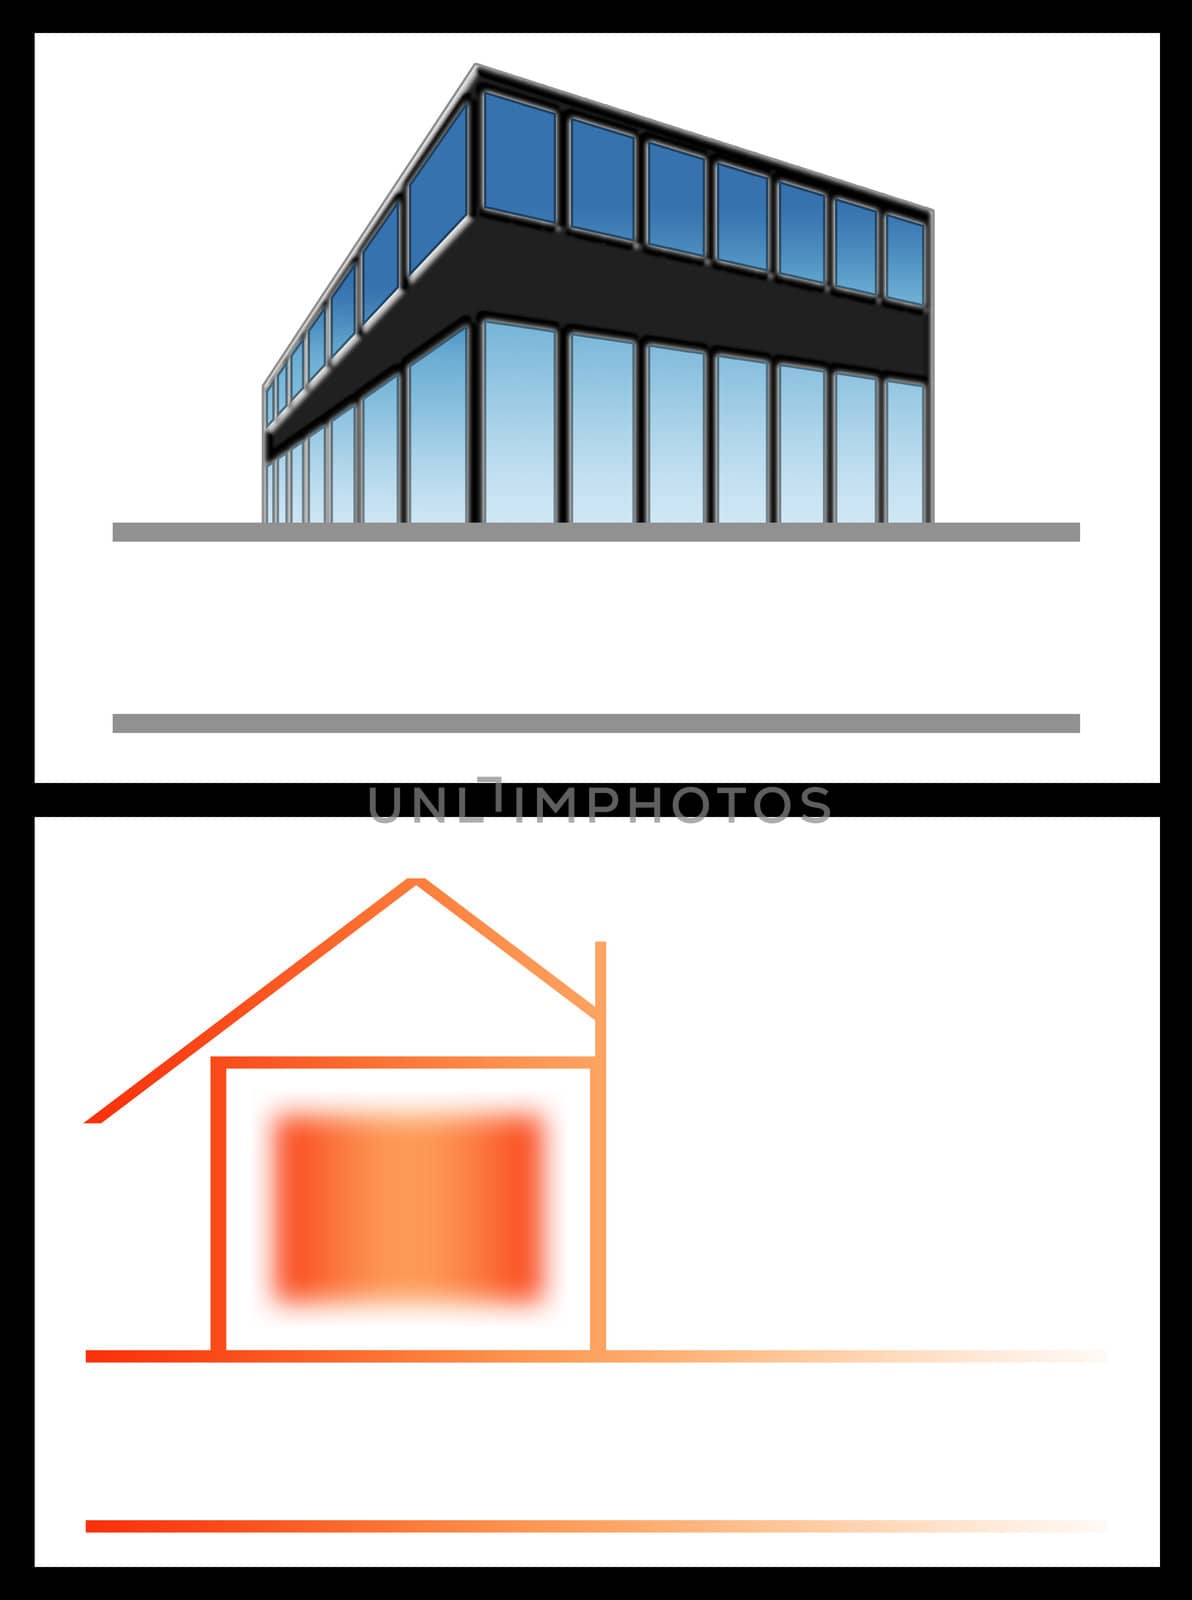 Illustration for real estate with free space for your brand, slogan or message
